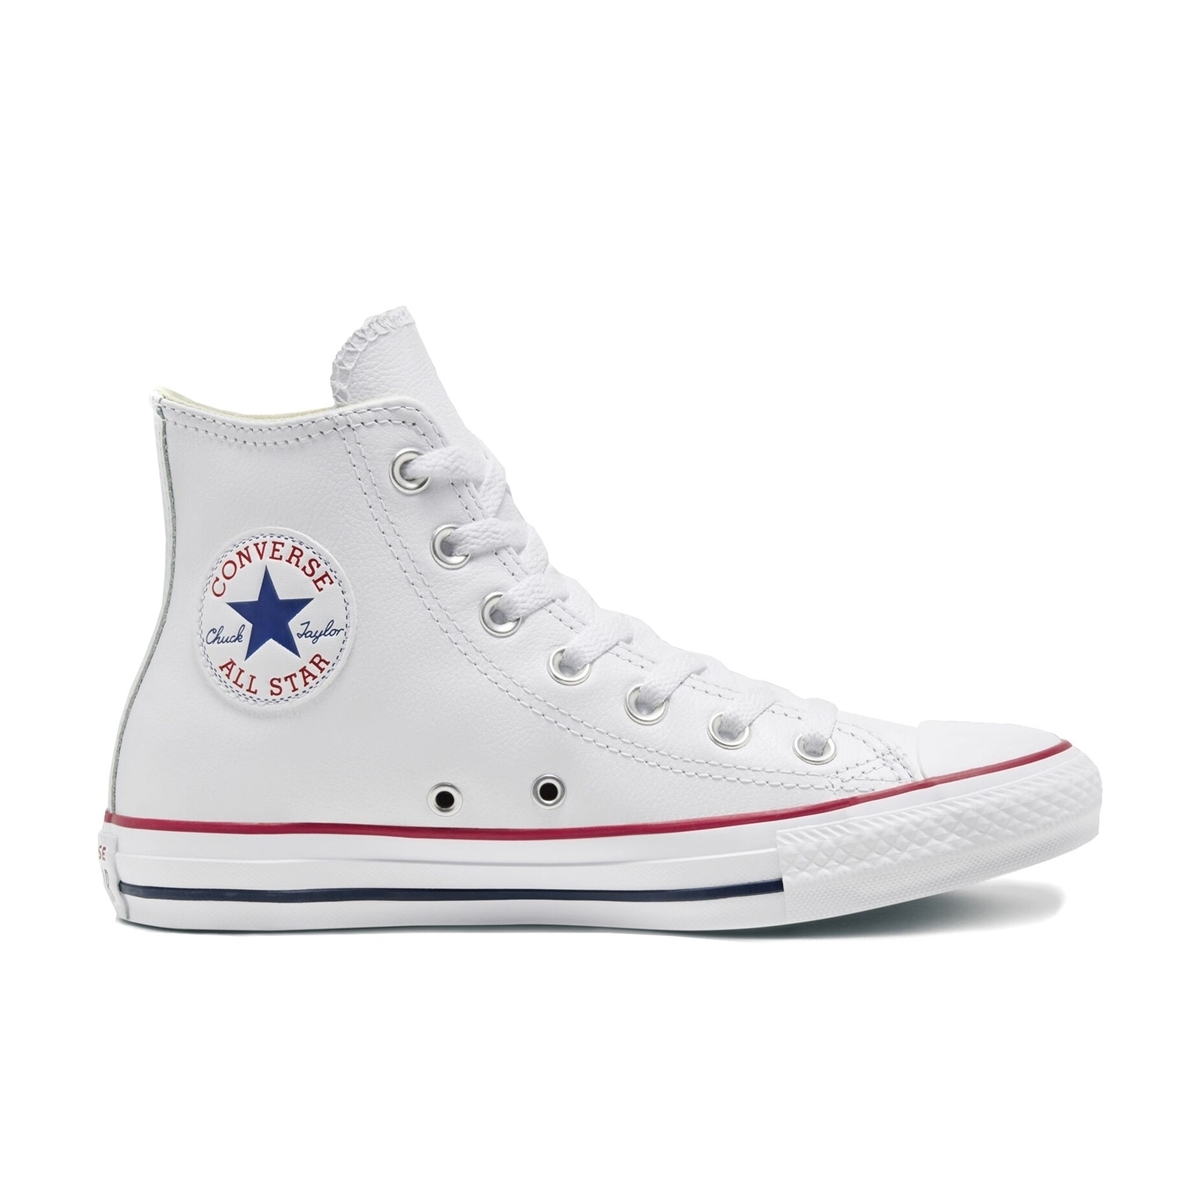 converse all star leather high tops